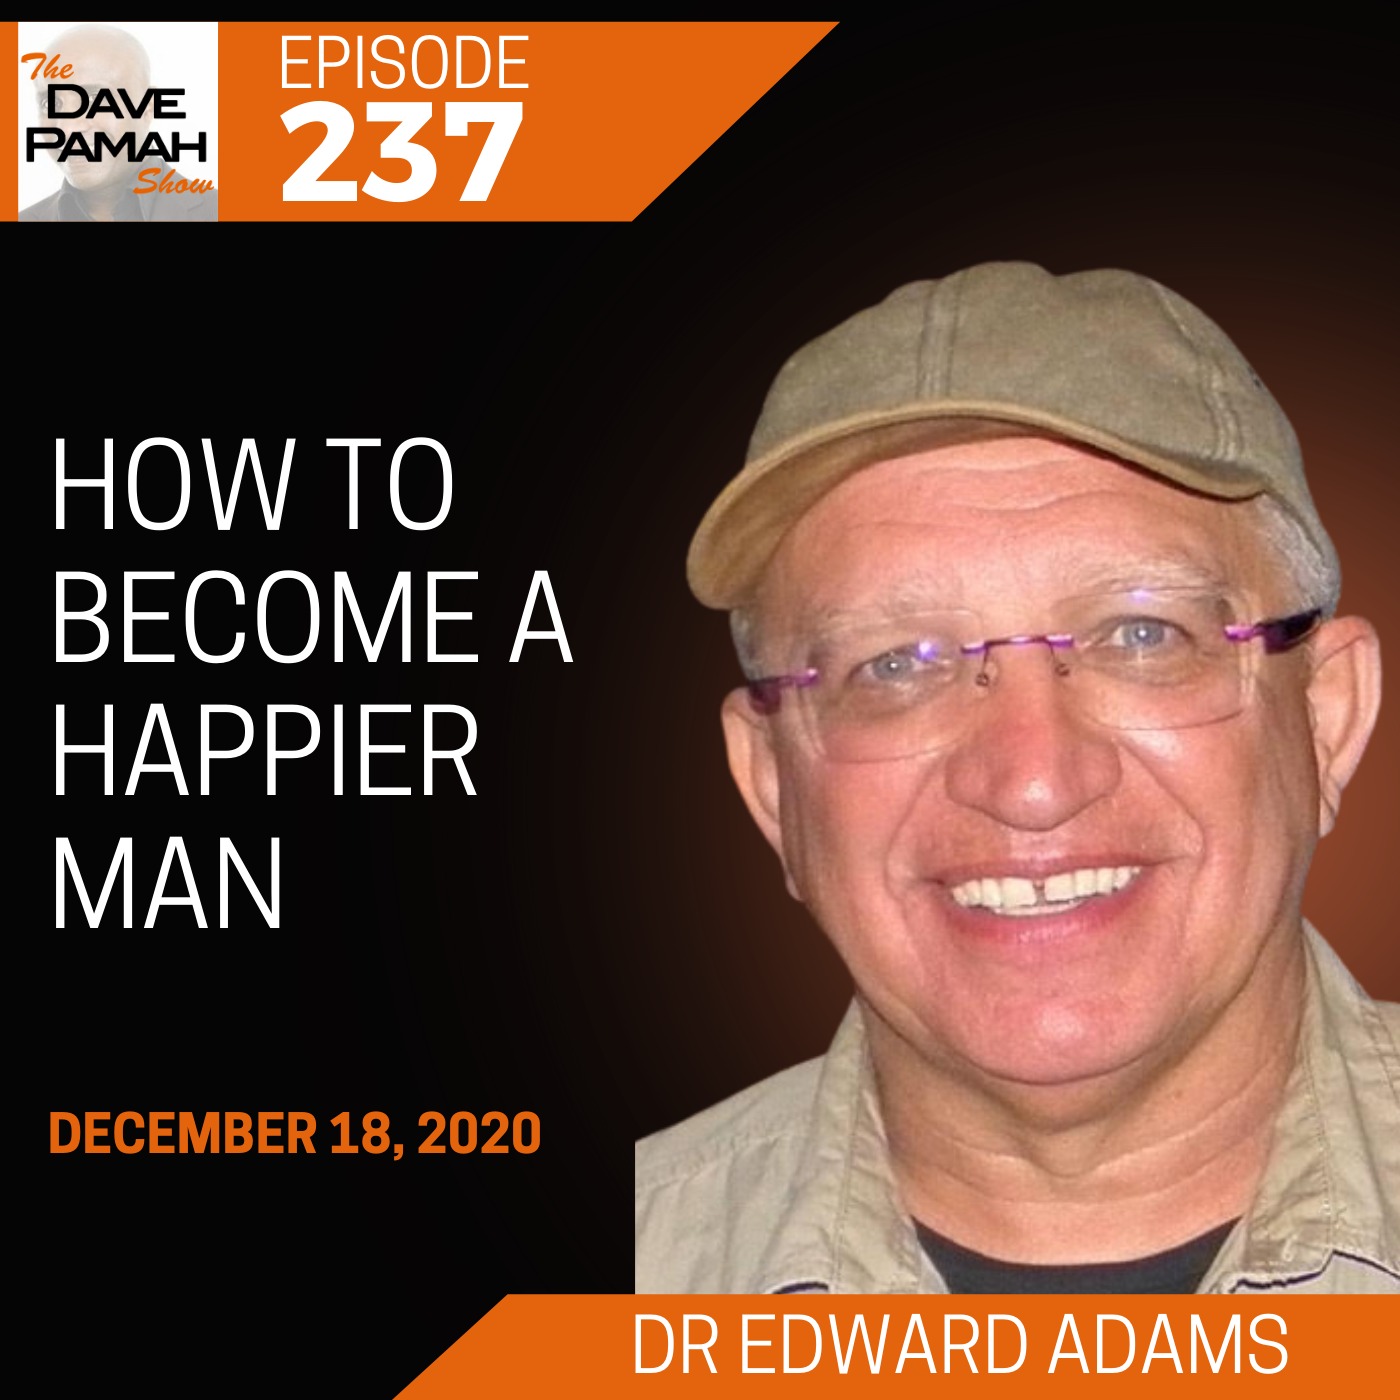 How to Become a Happier Man with Dr Edward Adams